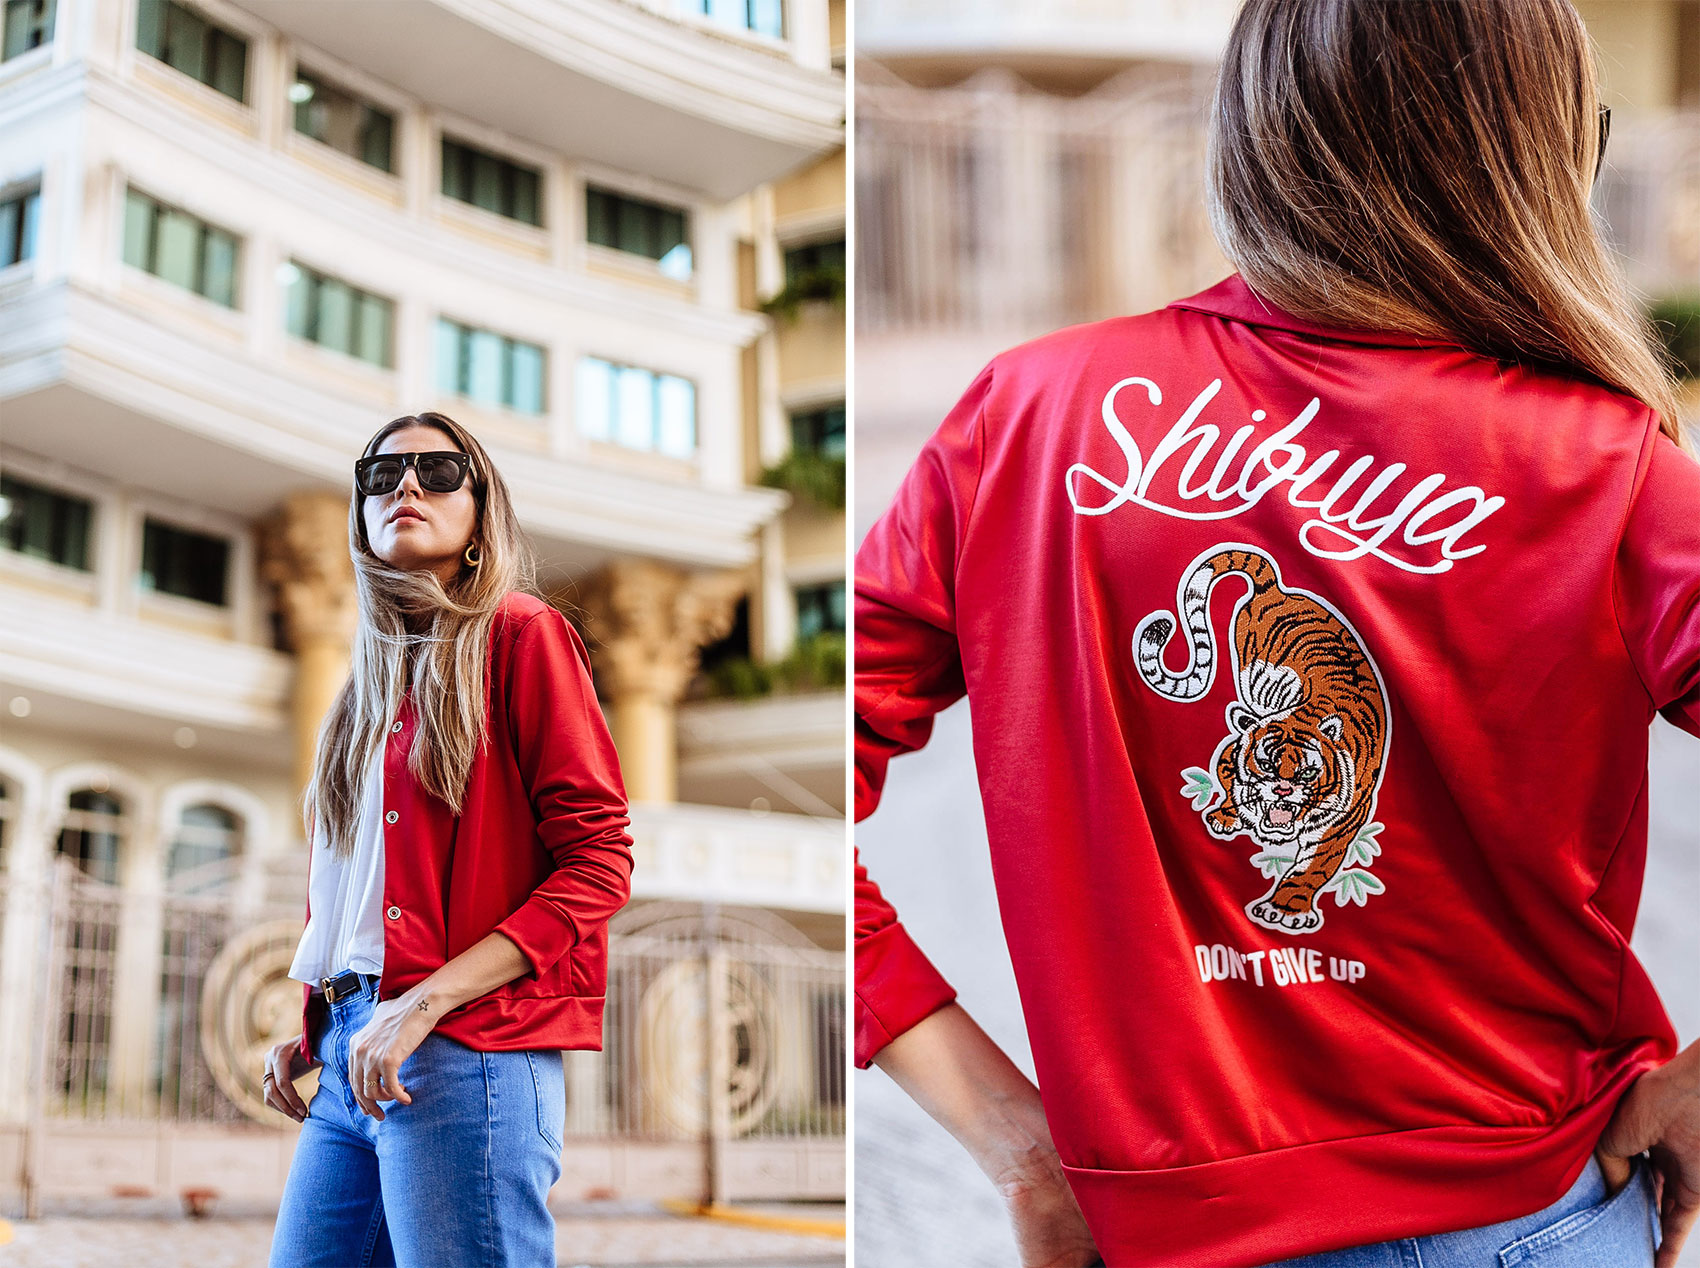 Maristella wearing sunglasses from & Other Stories, red satin jacket with embroidered tiger, jeans and Gucci belt